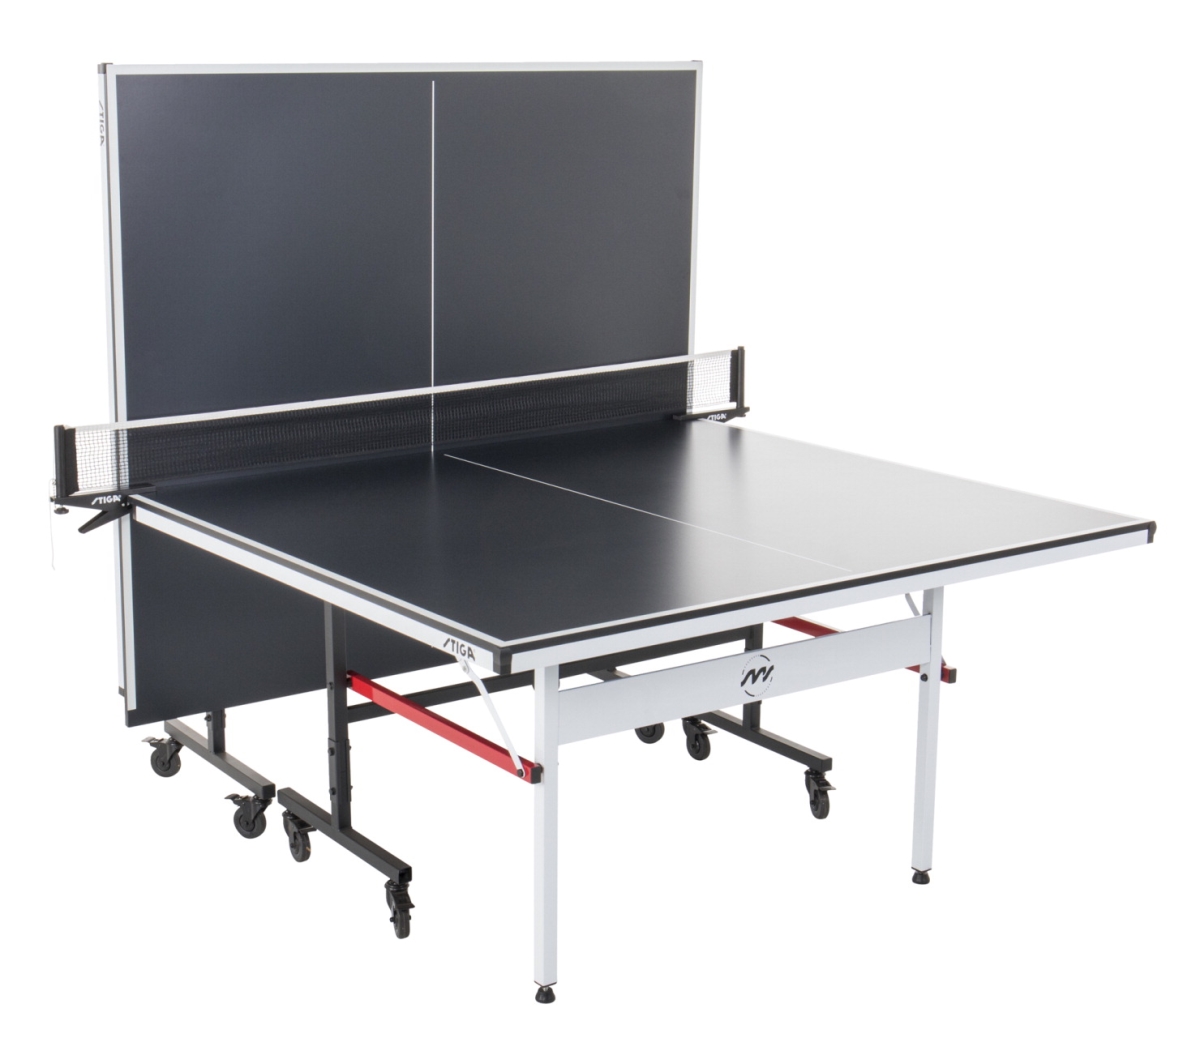 2009665 T3600 Quickplay Table Tennis Table, Black